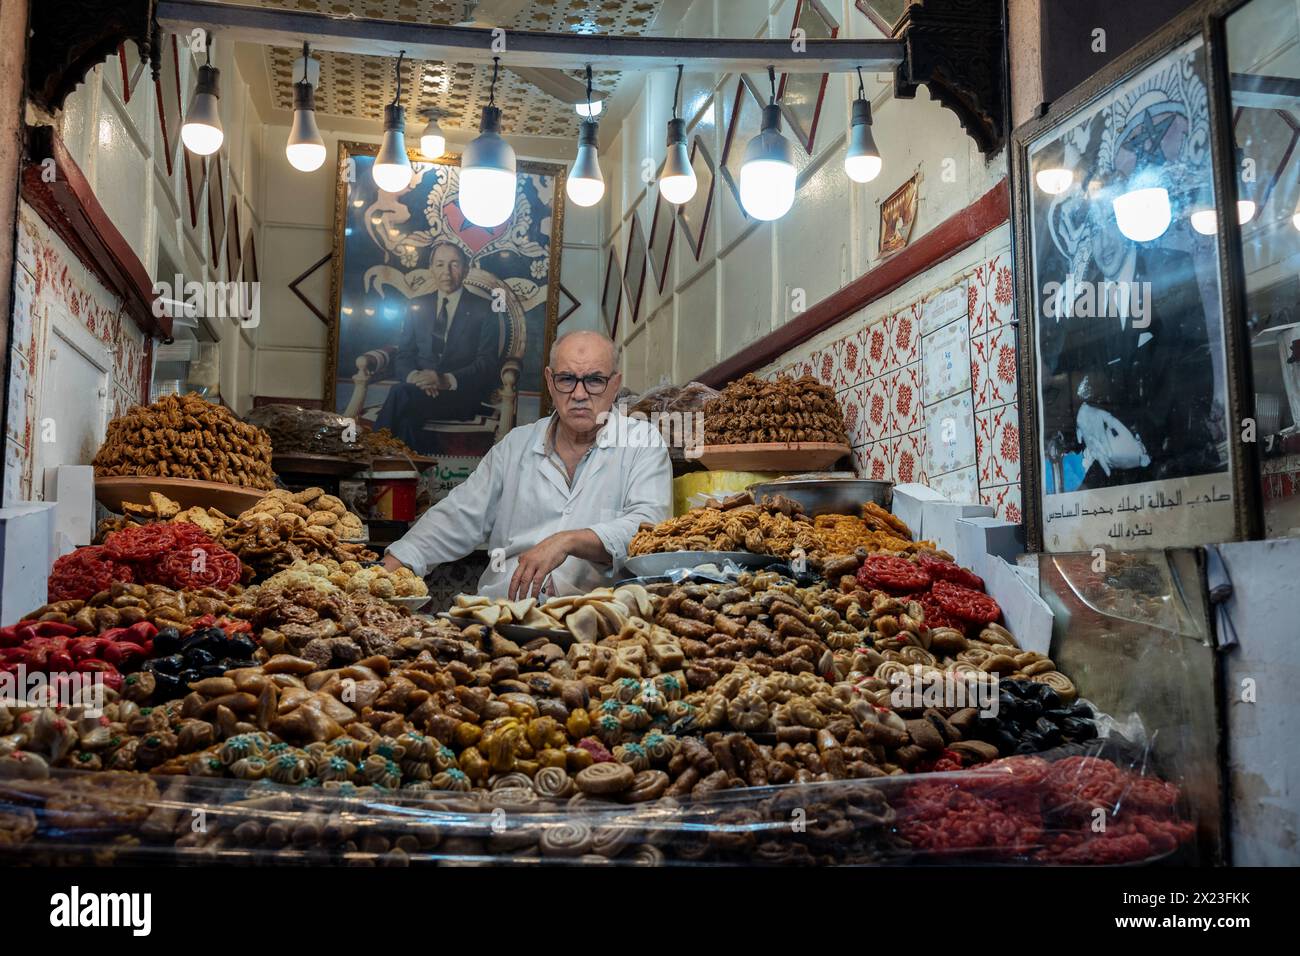 A Moroccan stall vendor selling varieties of dried fruits and nuts beneath the portraits of the former King Hassan II and current King Mohamed VI. Stock Photo